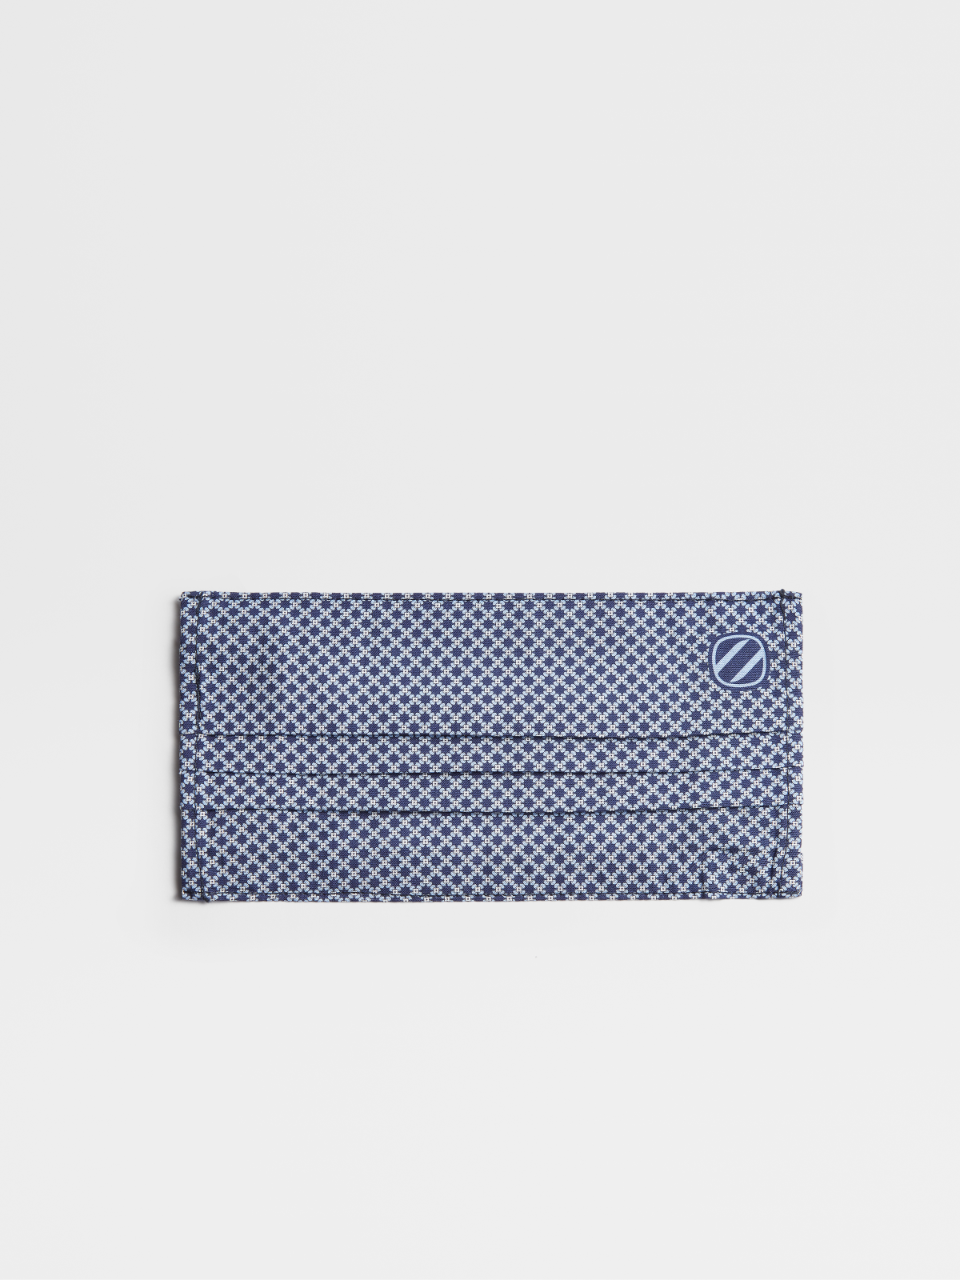 Cotton Surgical Mask Cover